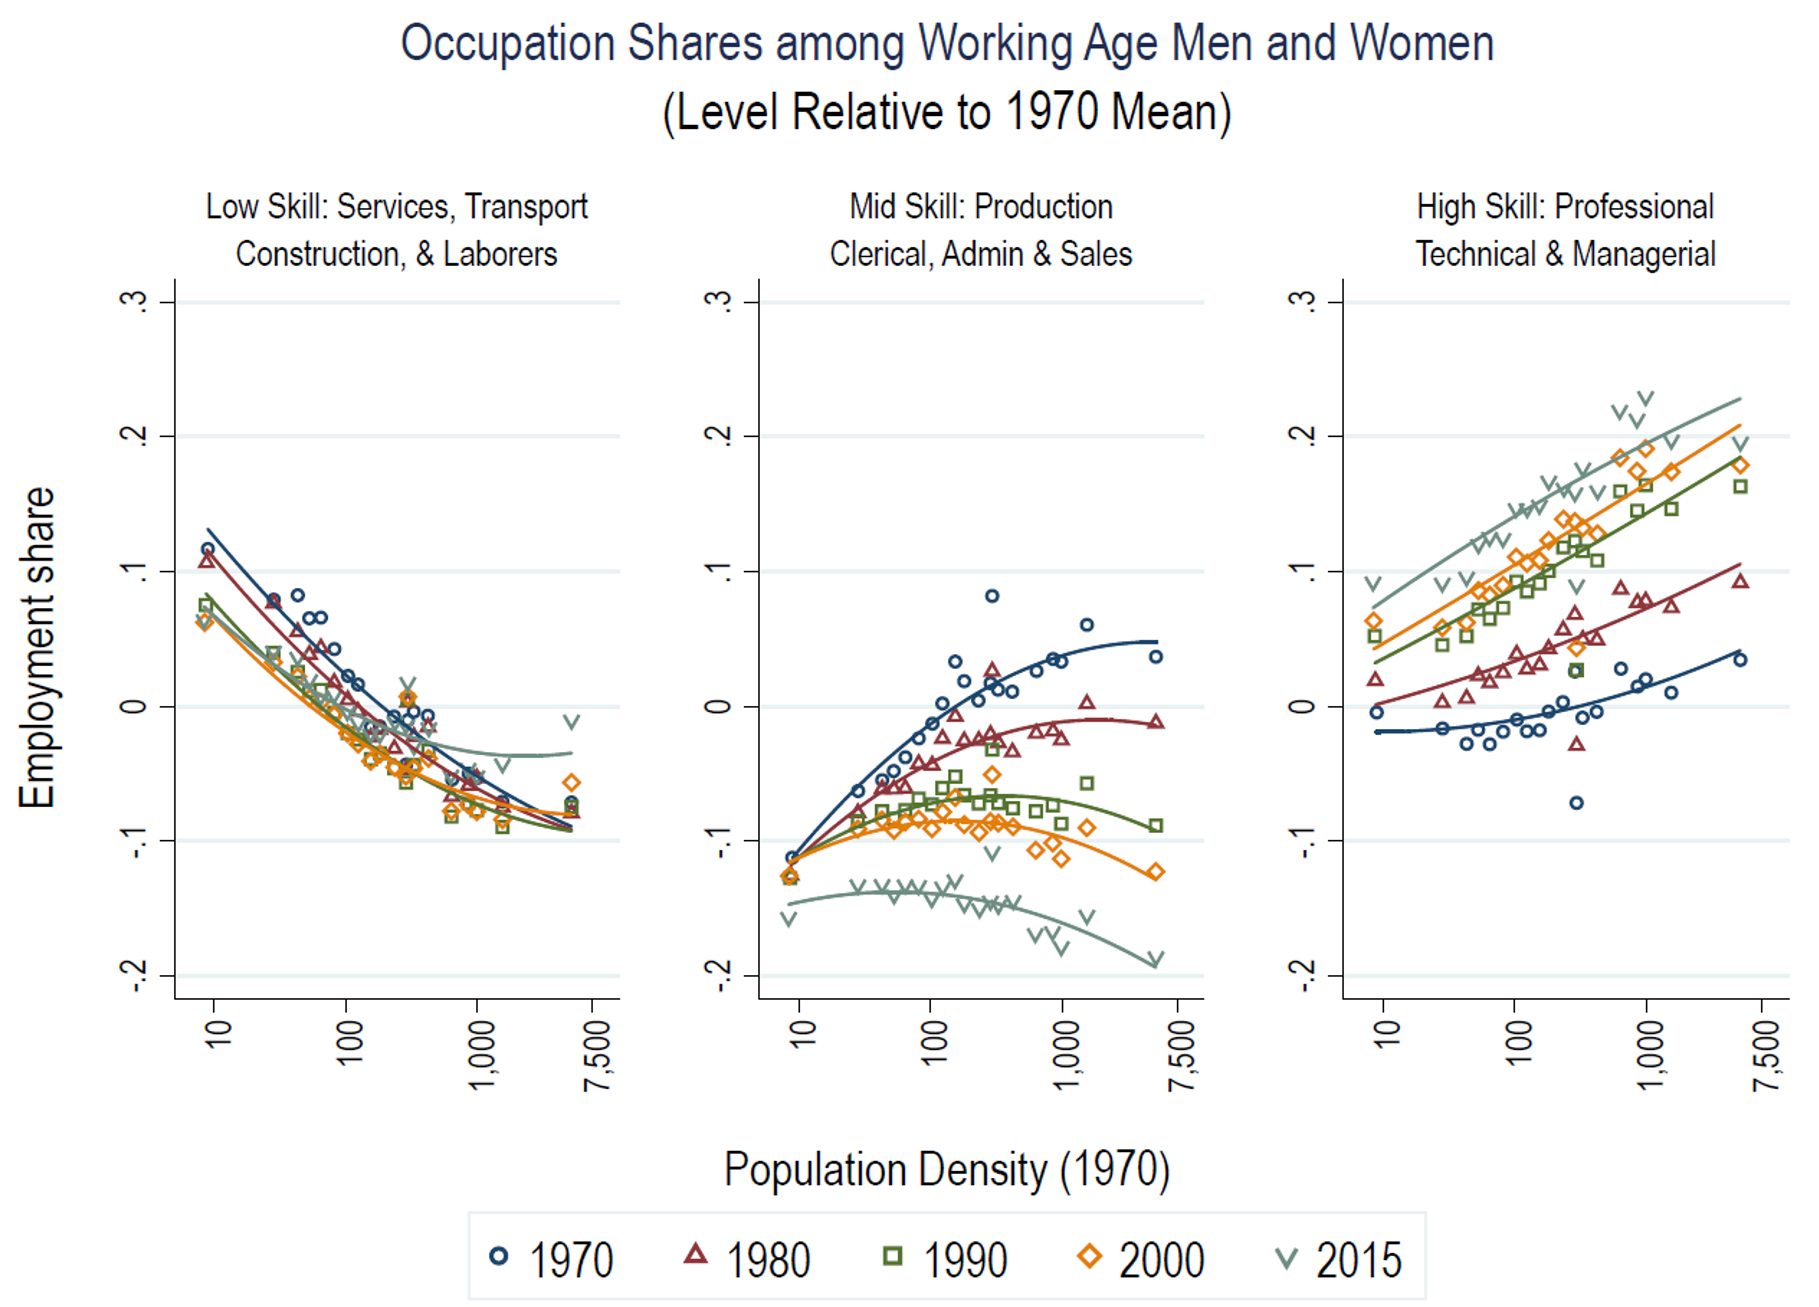 Figure 5. Occupational employment shares among working-age adults by commuting zone population density and occupational skill-level, relative to 1970 mean: 1970-2015. See accessible link for data.